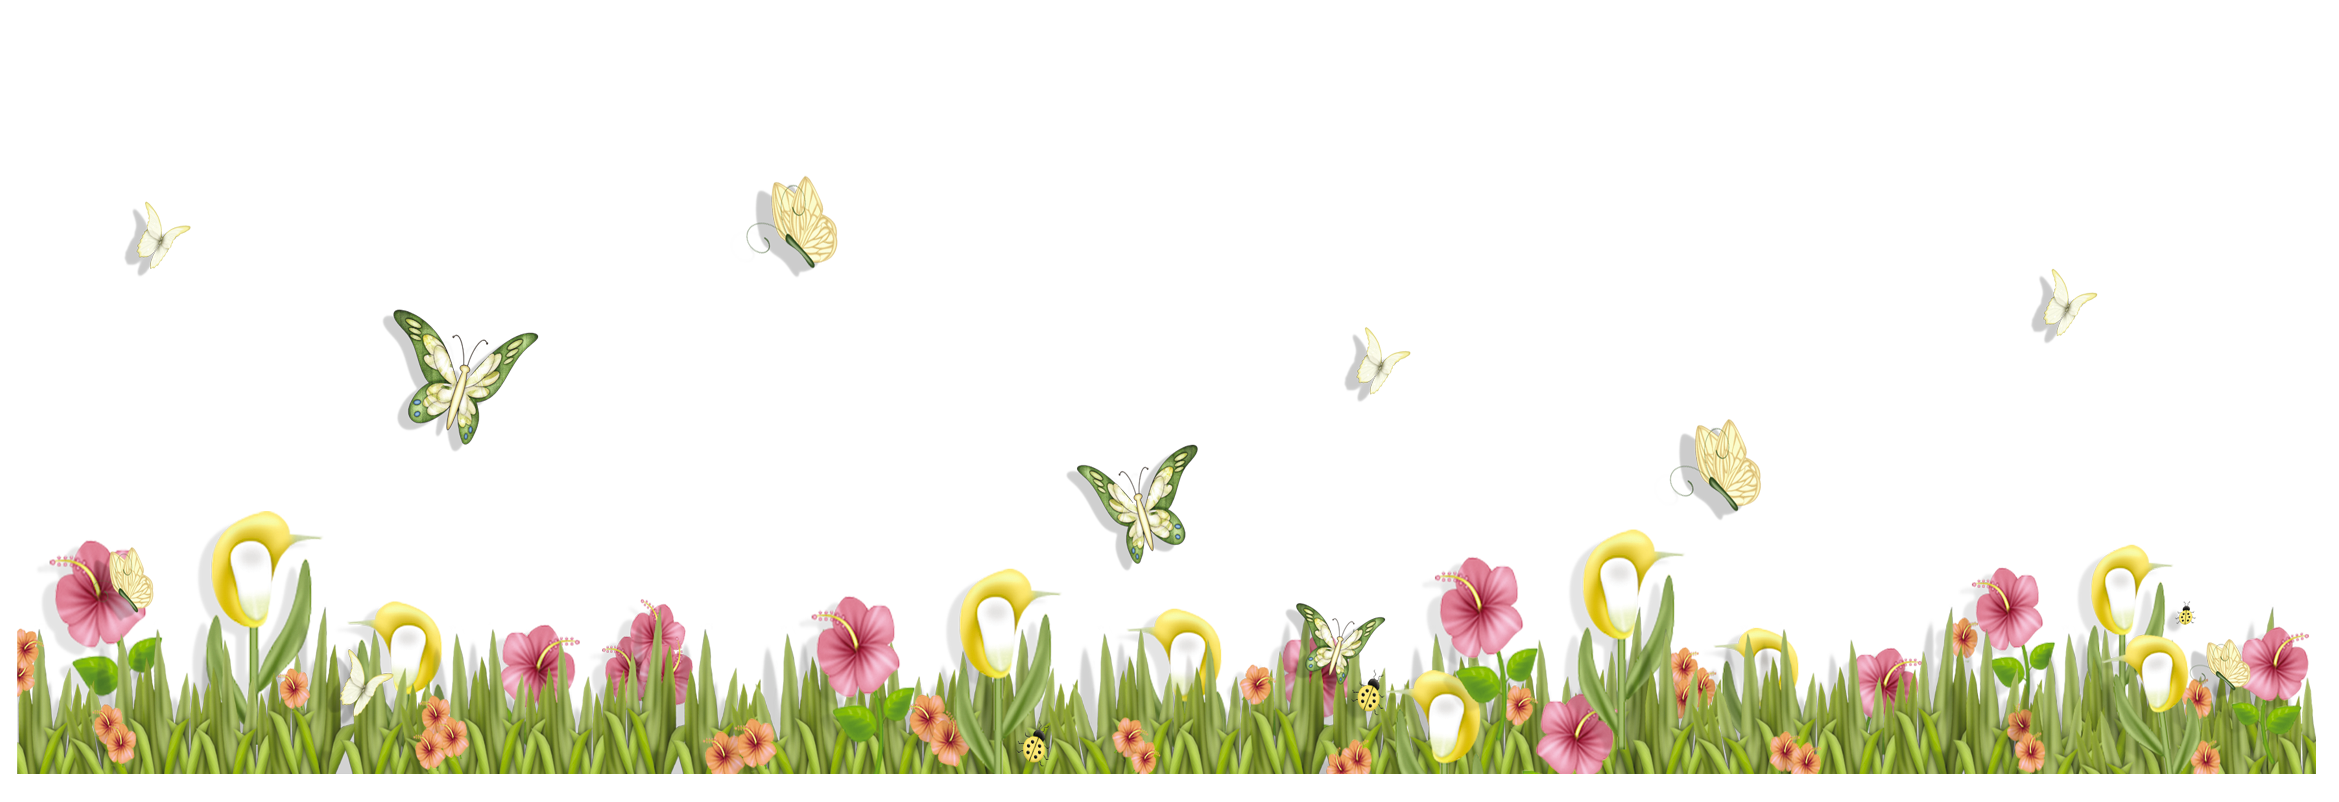 Colors of the wind - Tramas - Página 2 Grass_with_Butterflies_and_Flowers_PNG_Clipart